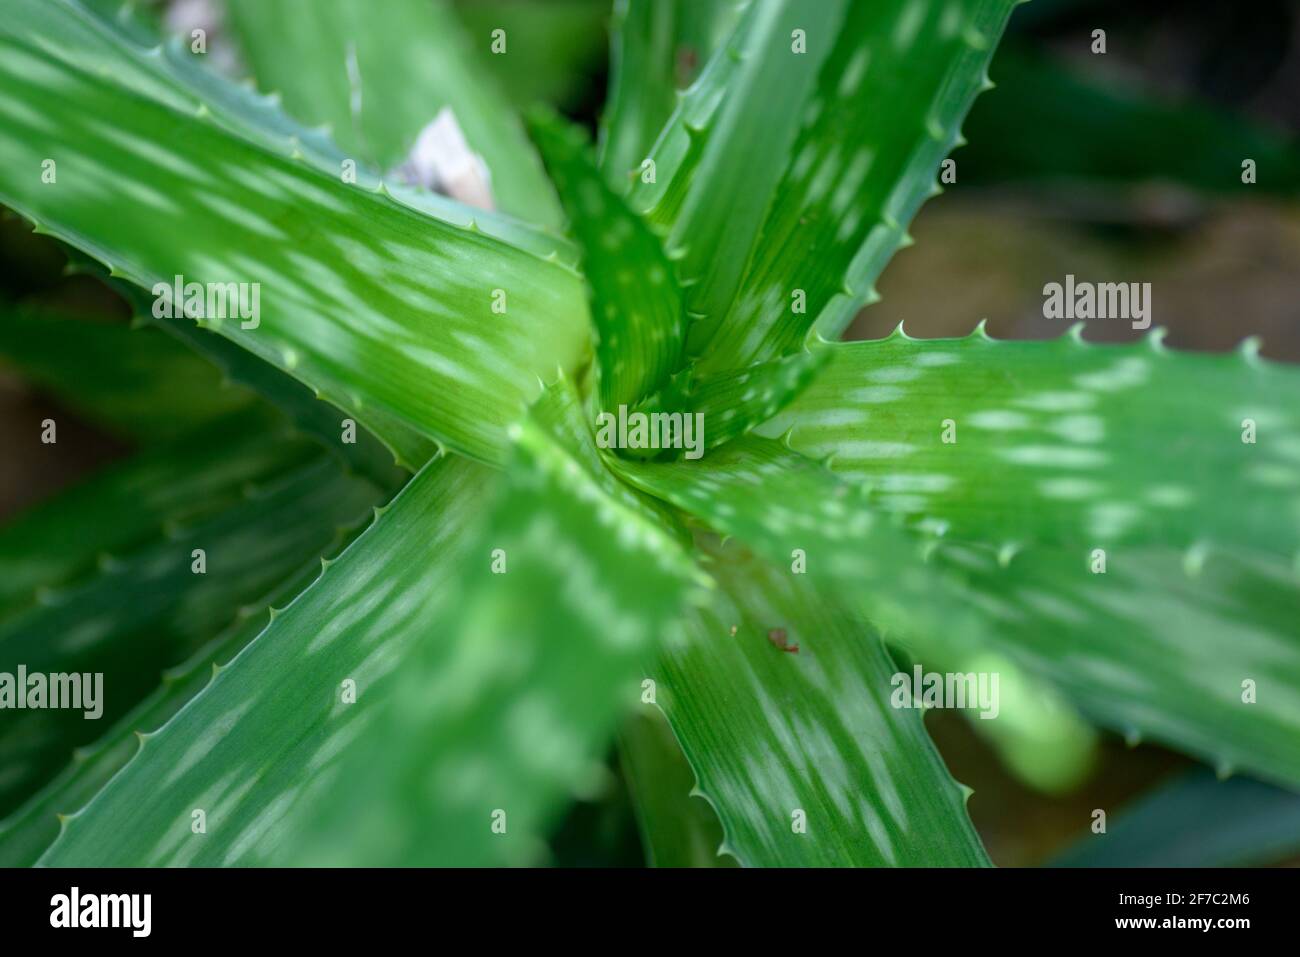 Green leaves of aloe. Selective focus with shallow depth of field. Stock Photo